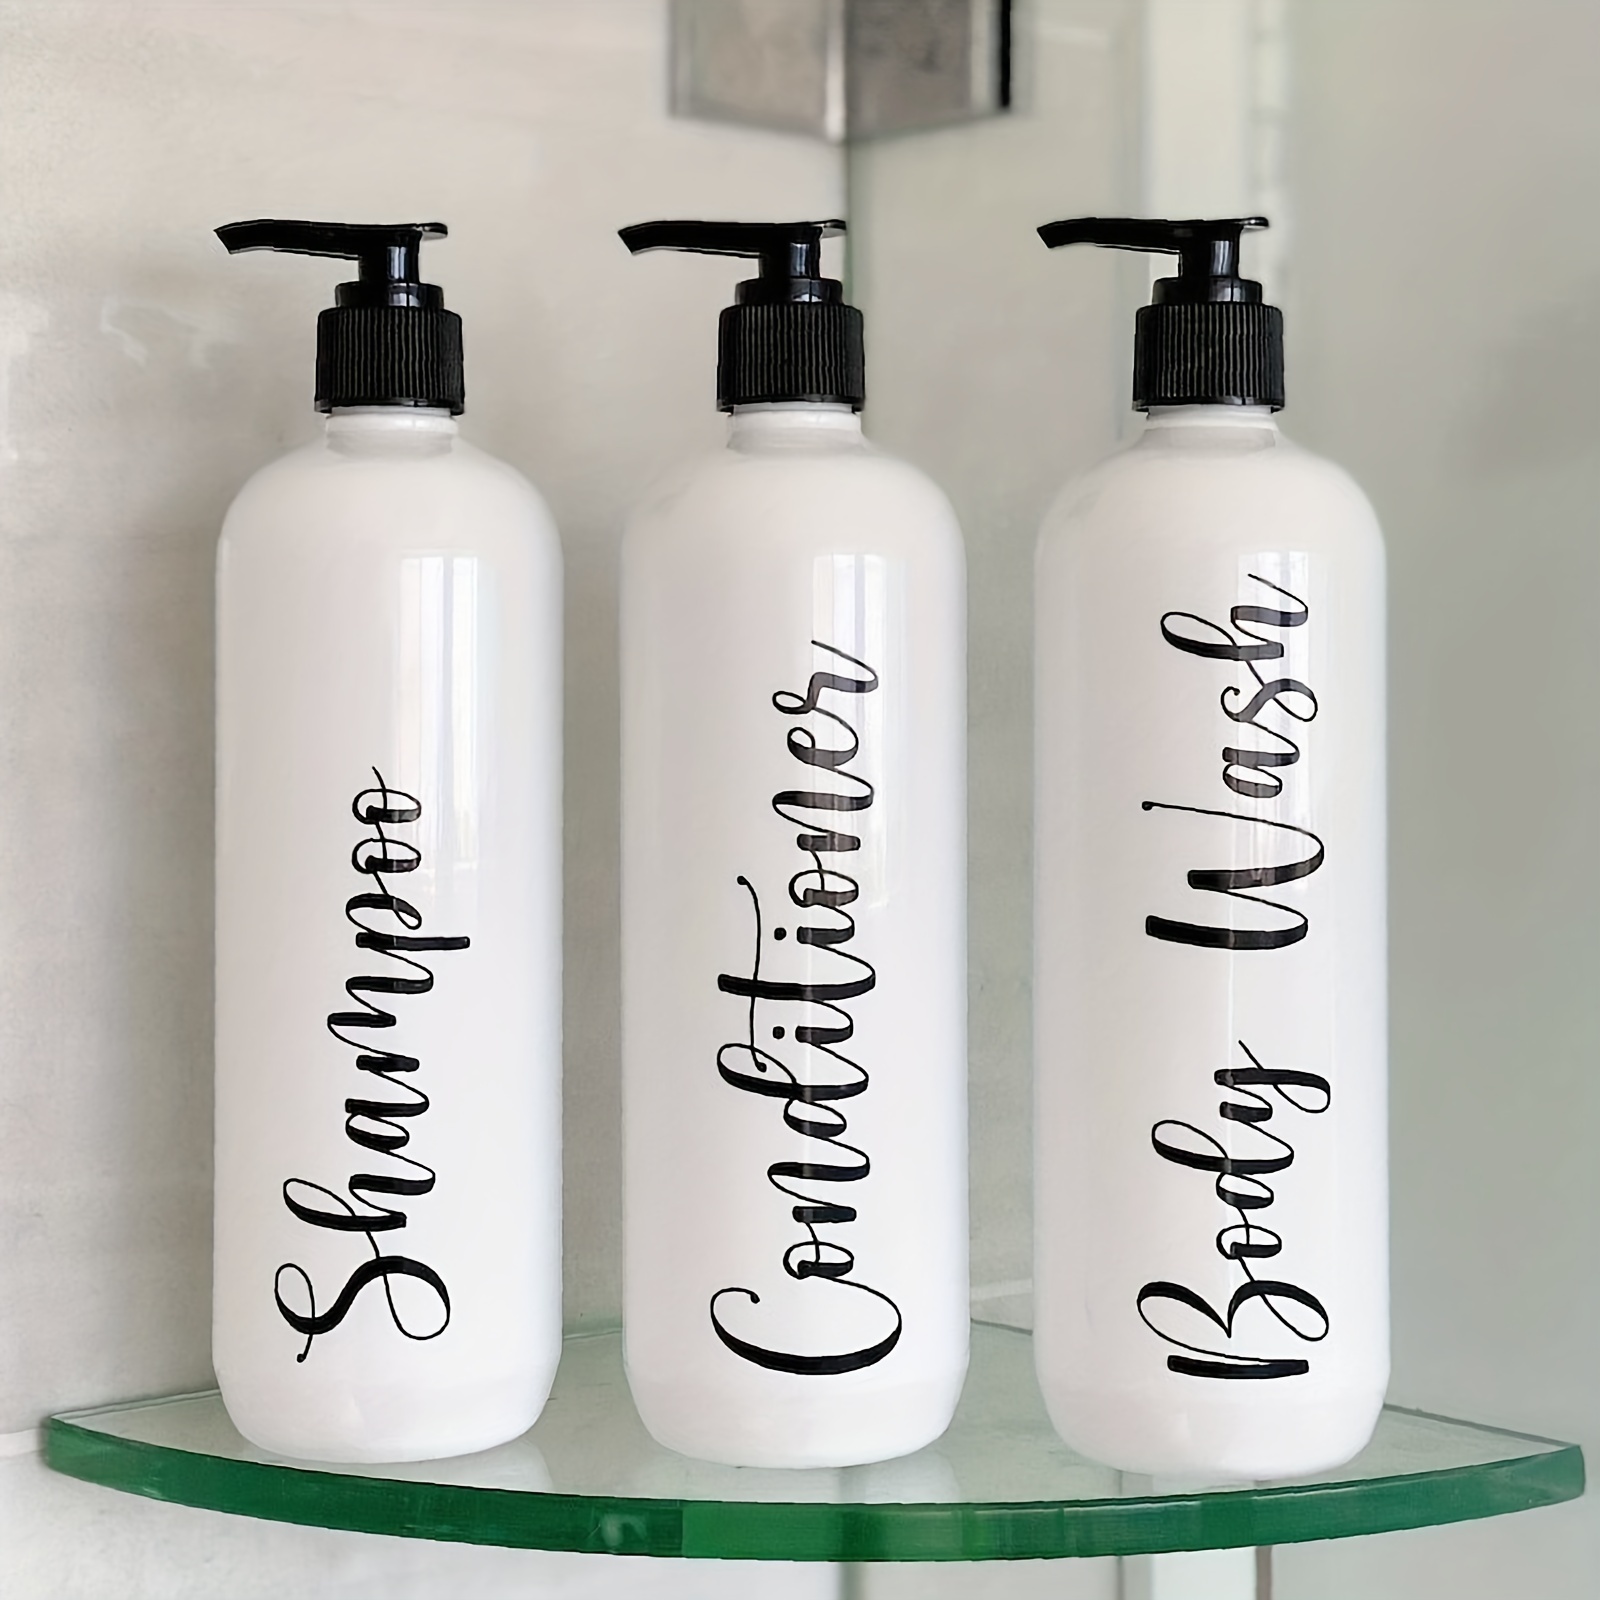 Shampoo and Conditioner Bottles